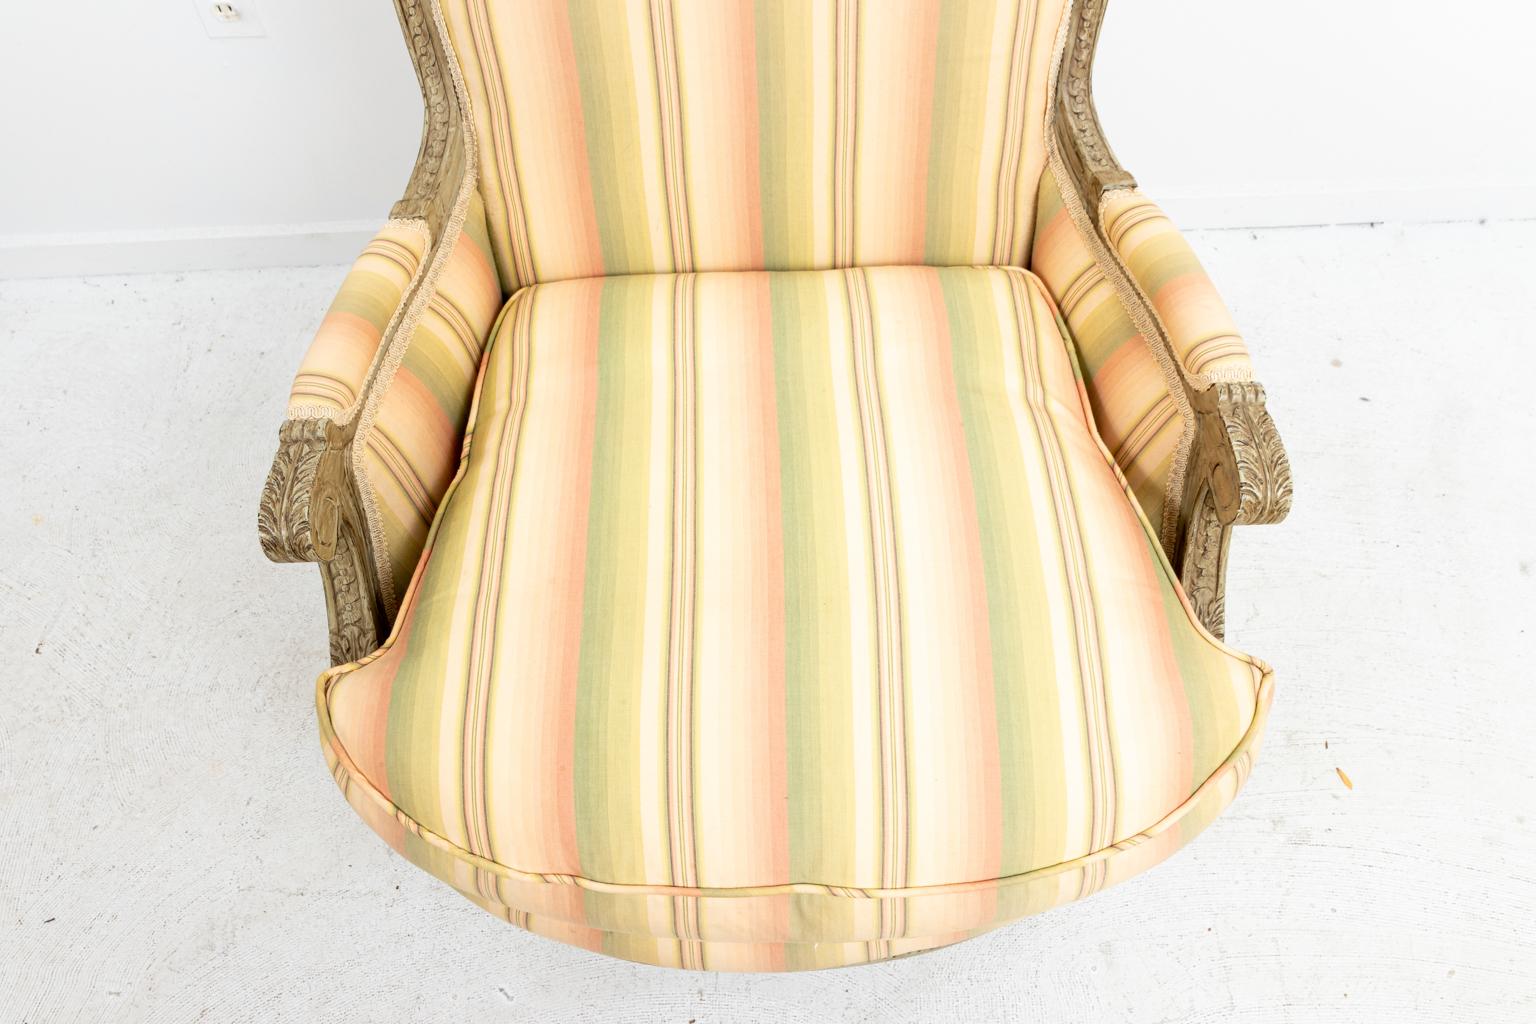 French bergère armchair upholstered in Brunschwig & Fils fabric, circa 1900s-1920s. The piece also features carved guilloche trim. Please note of wear consistent with age.